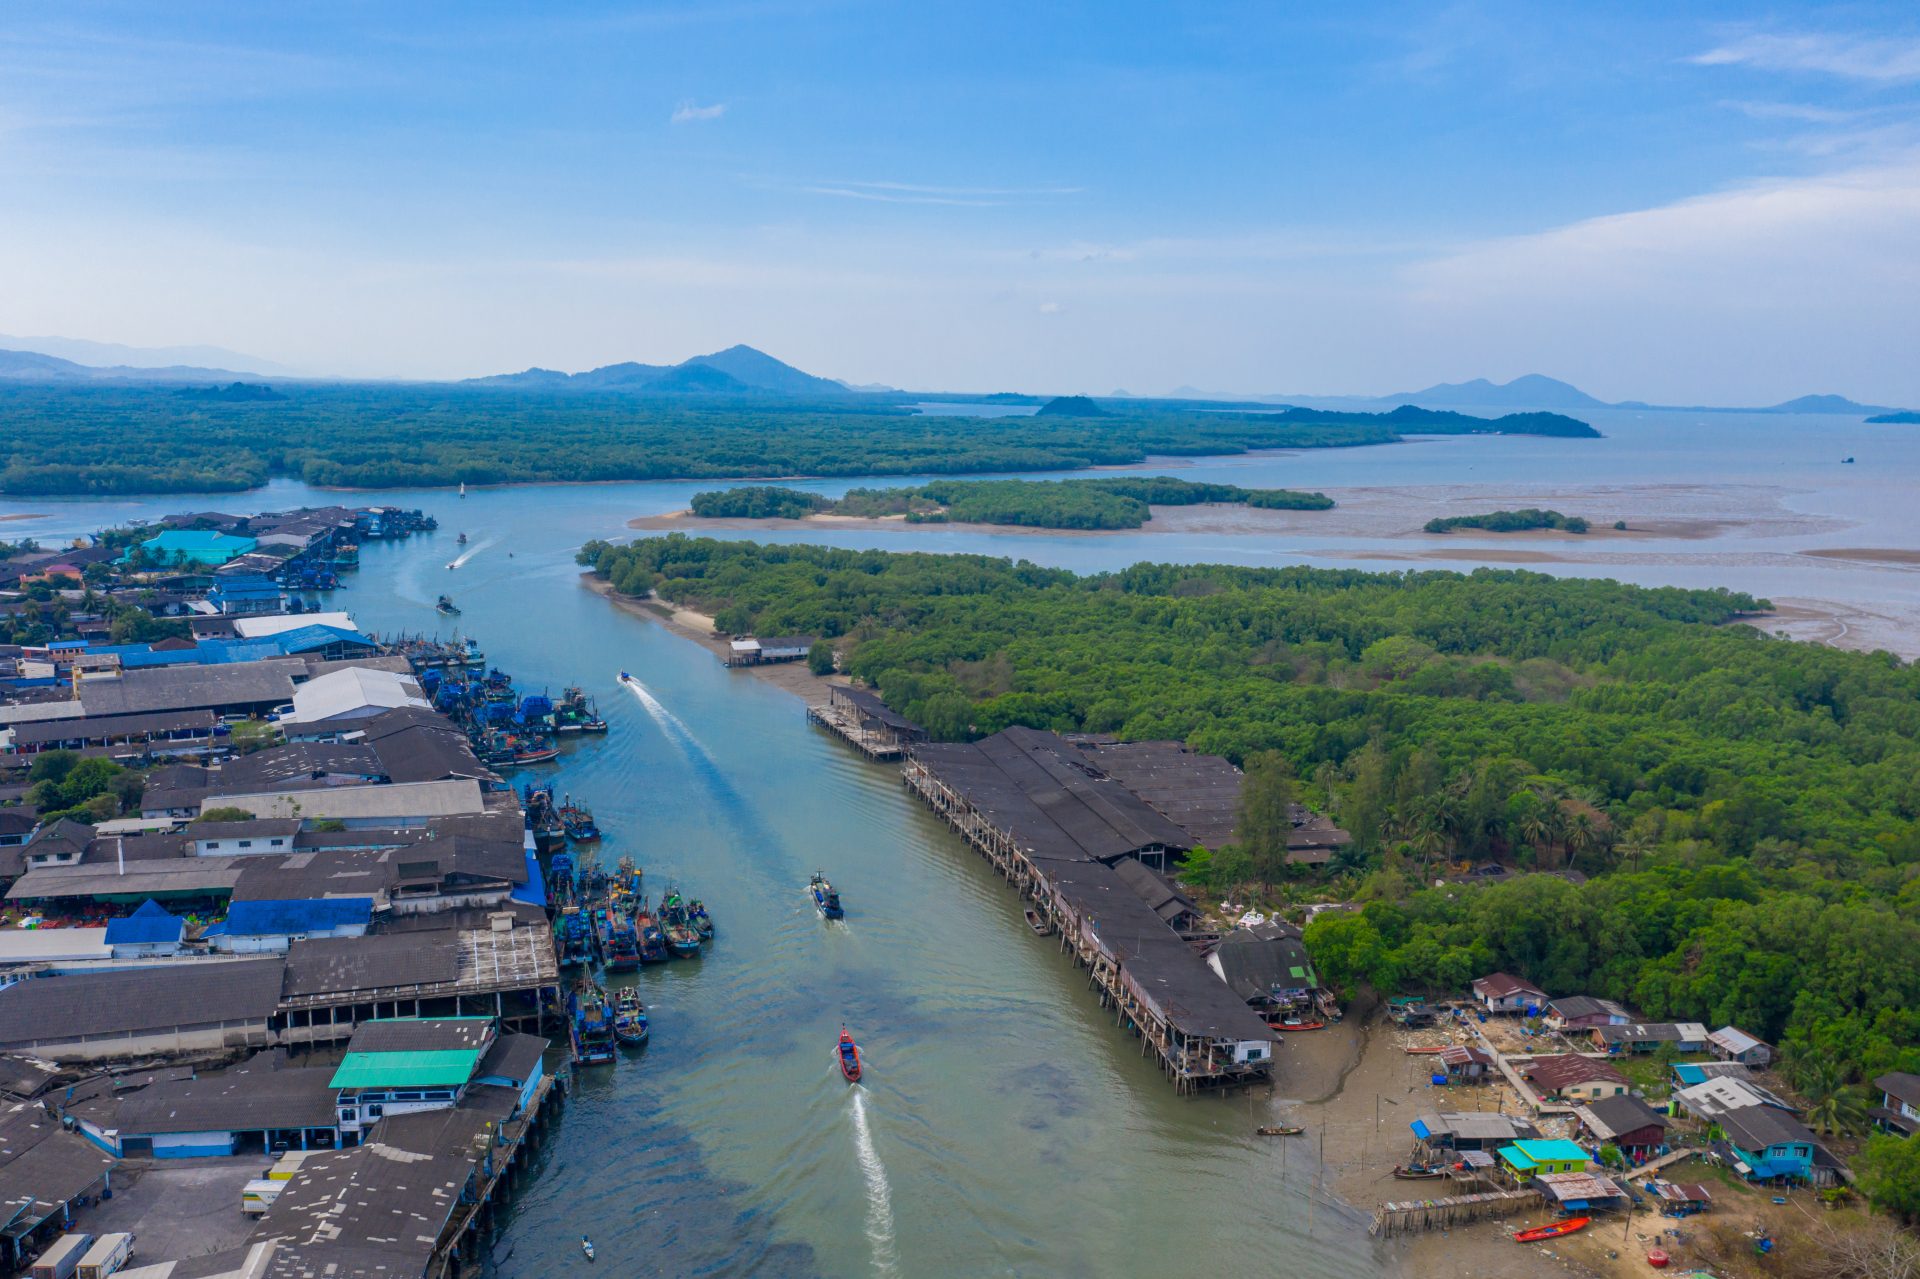 Aerial view of Ranong estuary, Thailand. From: Shutterstock